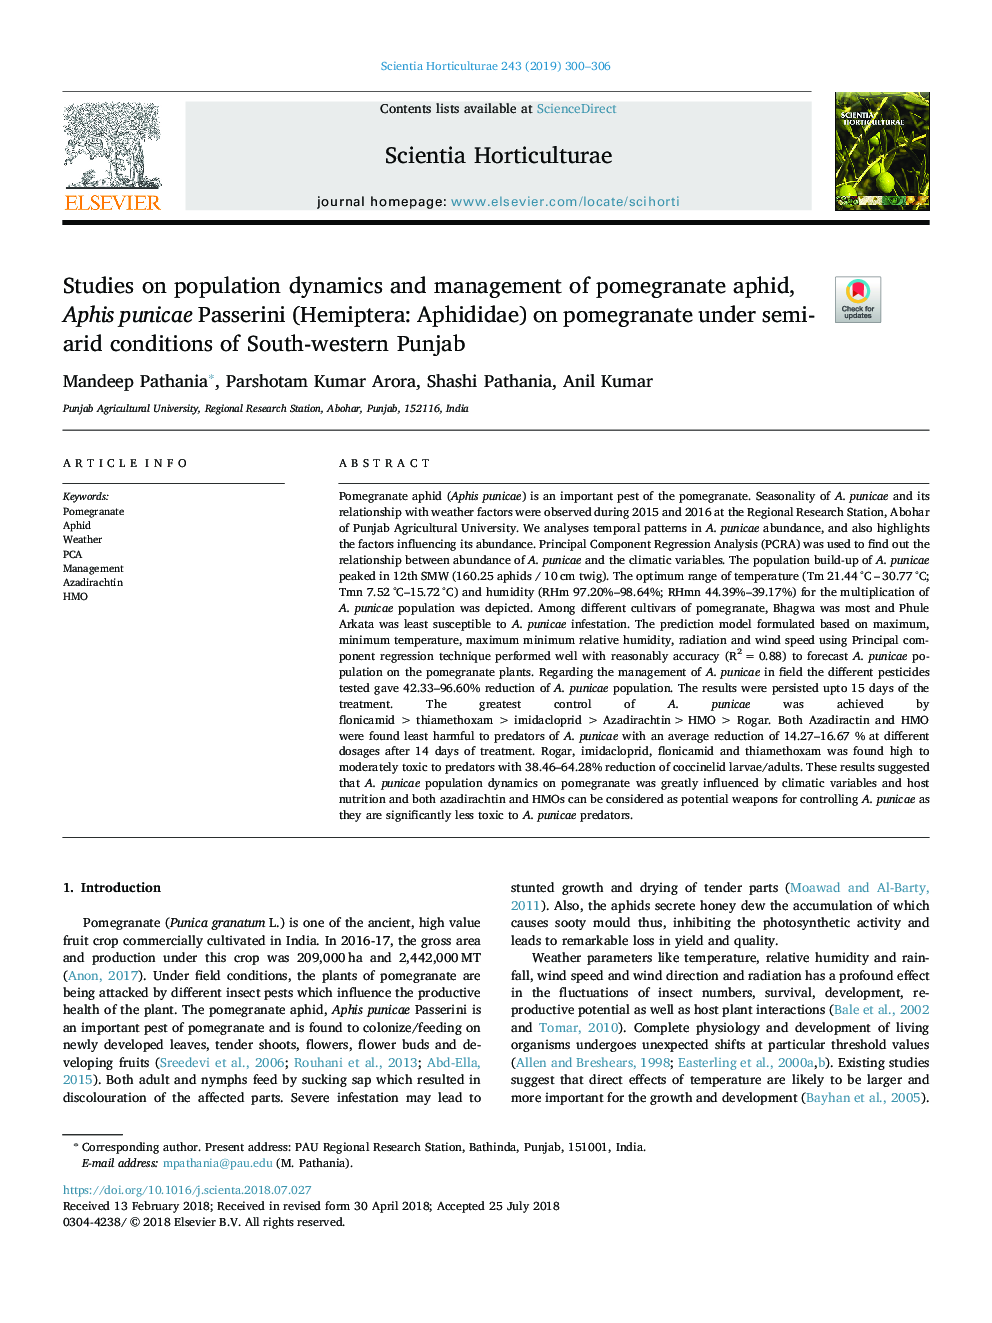 Studies on population dynamics and management of pomegranate aphid, Aphis punicae Passerini (Hemiptera: Aphididae) on pomegranate under semi-arid conditions of South-western Punjab